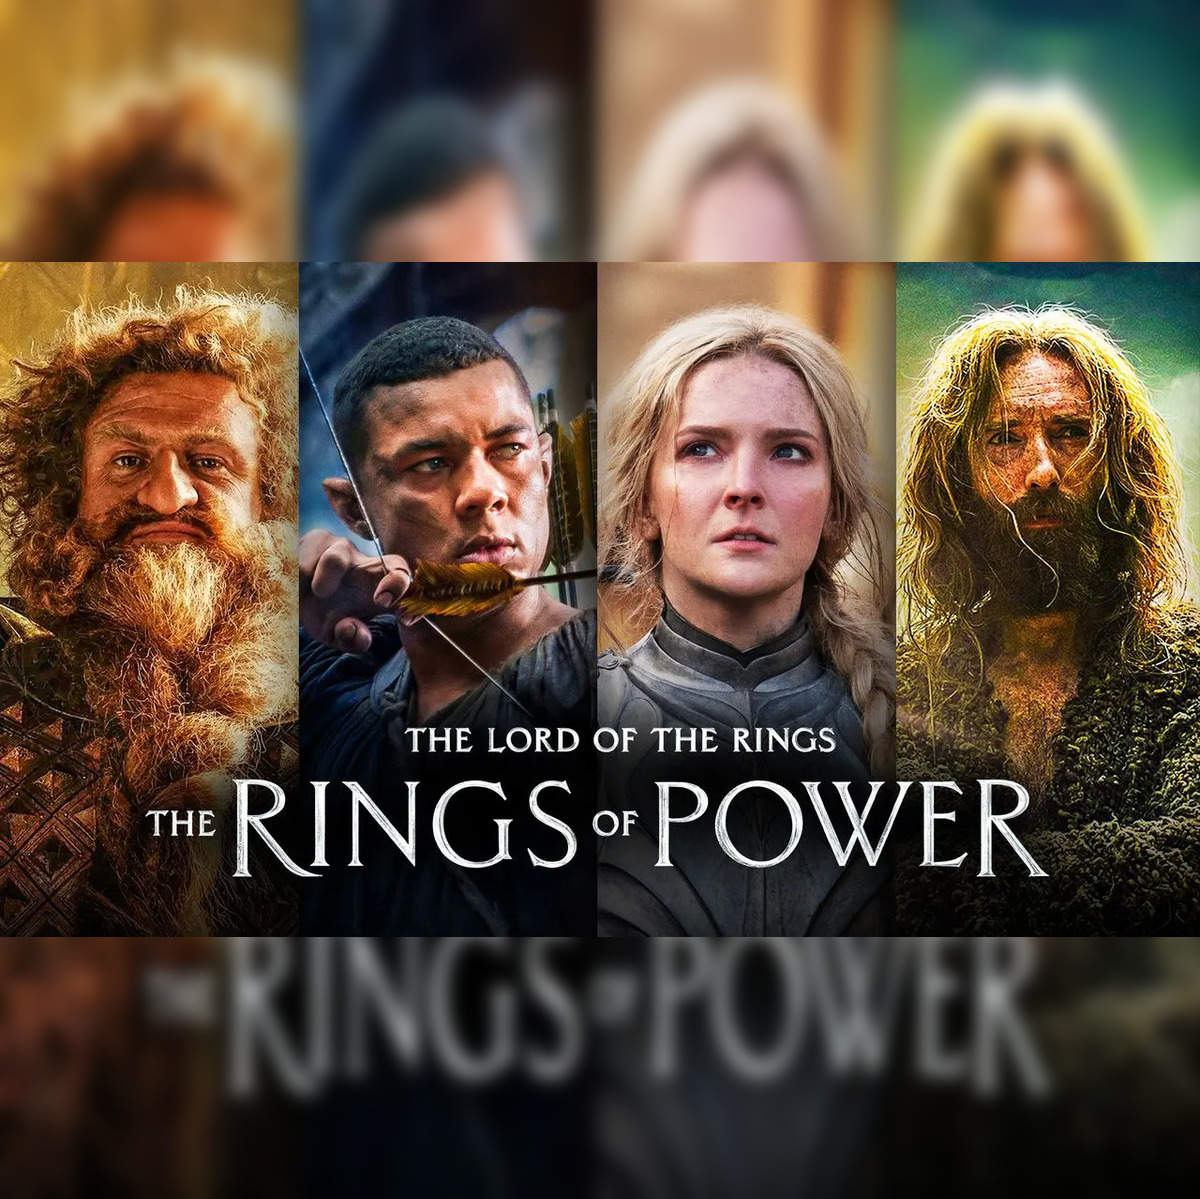 Rings of Power season 2 release date speculation, cast, plot, and news